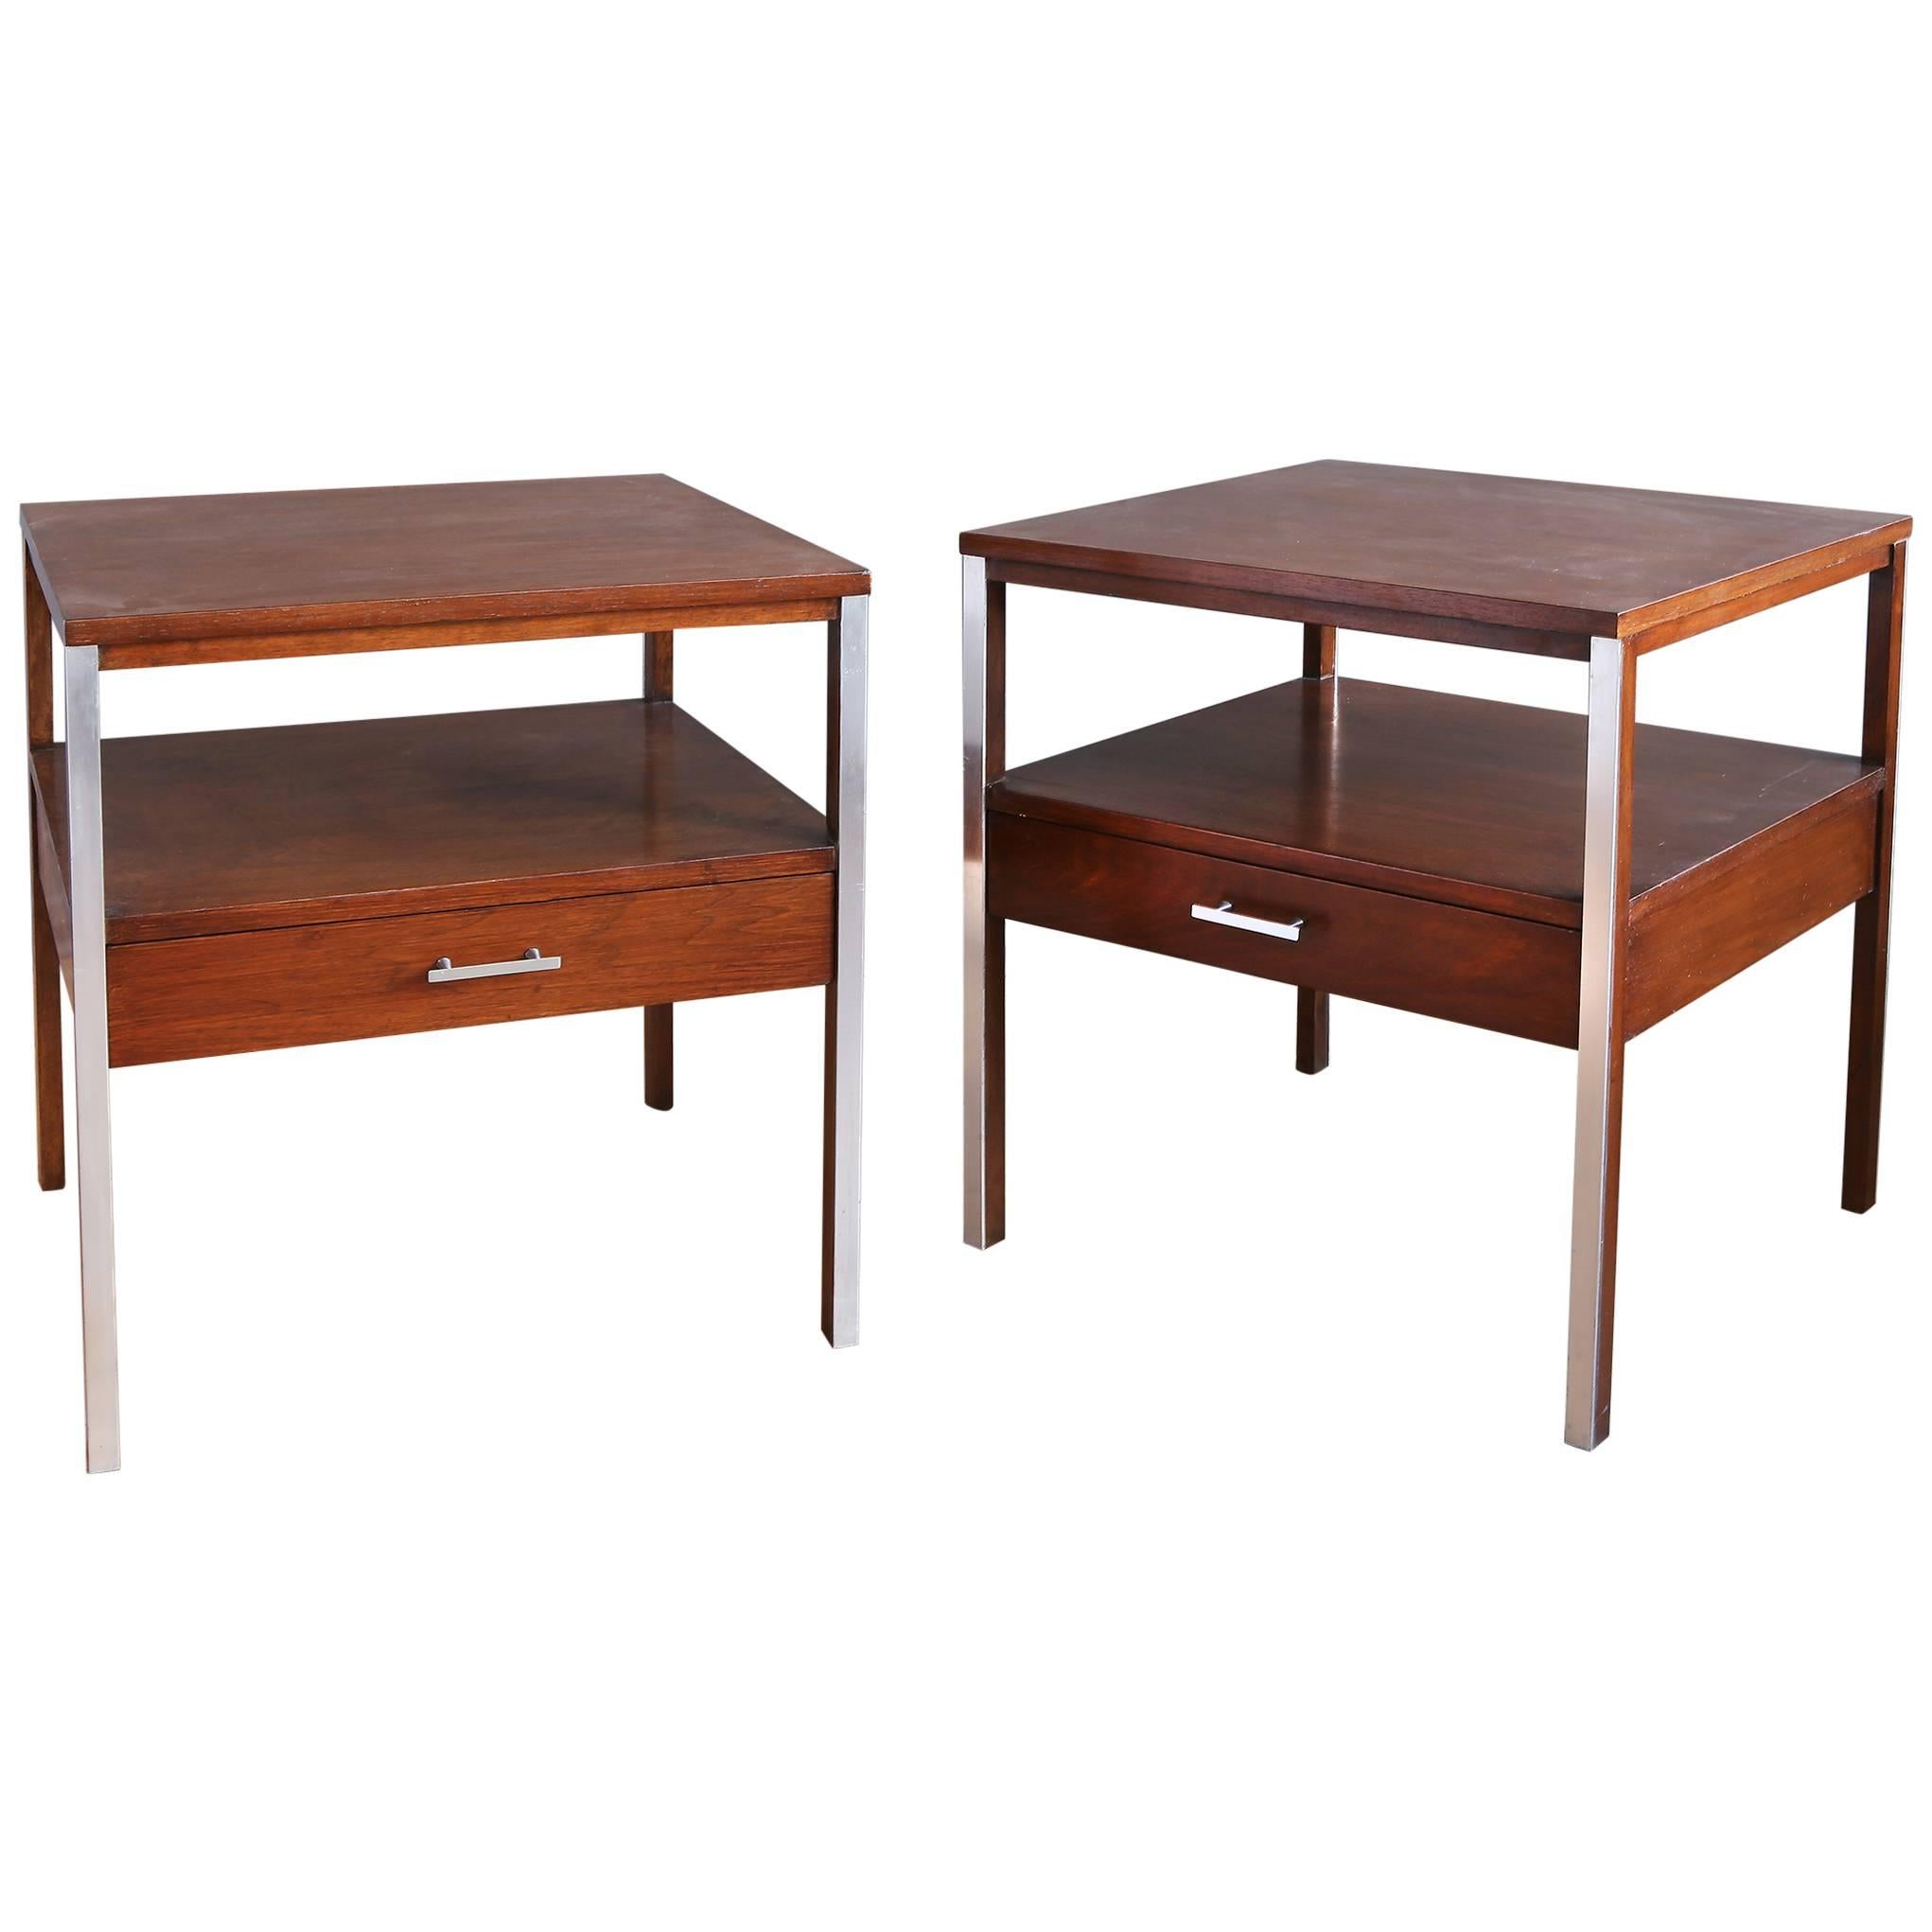 Pair of Walnut Side Tables by Paul McCobb for Calvin